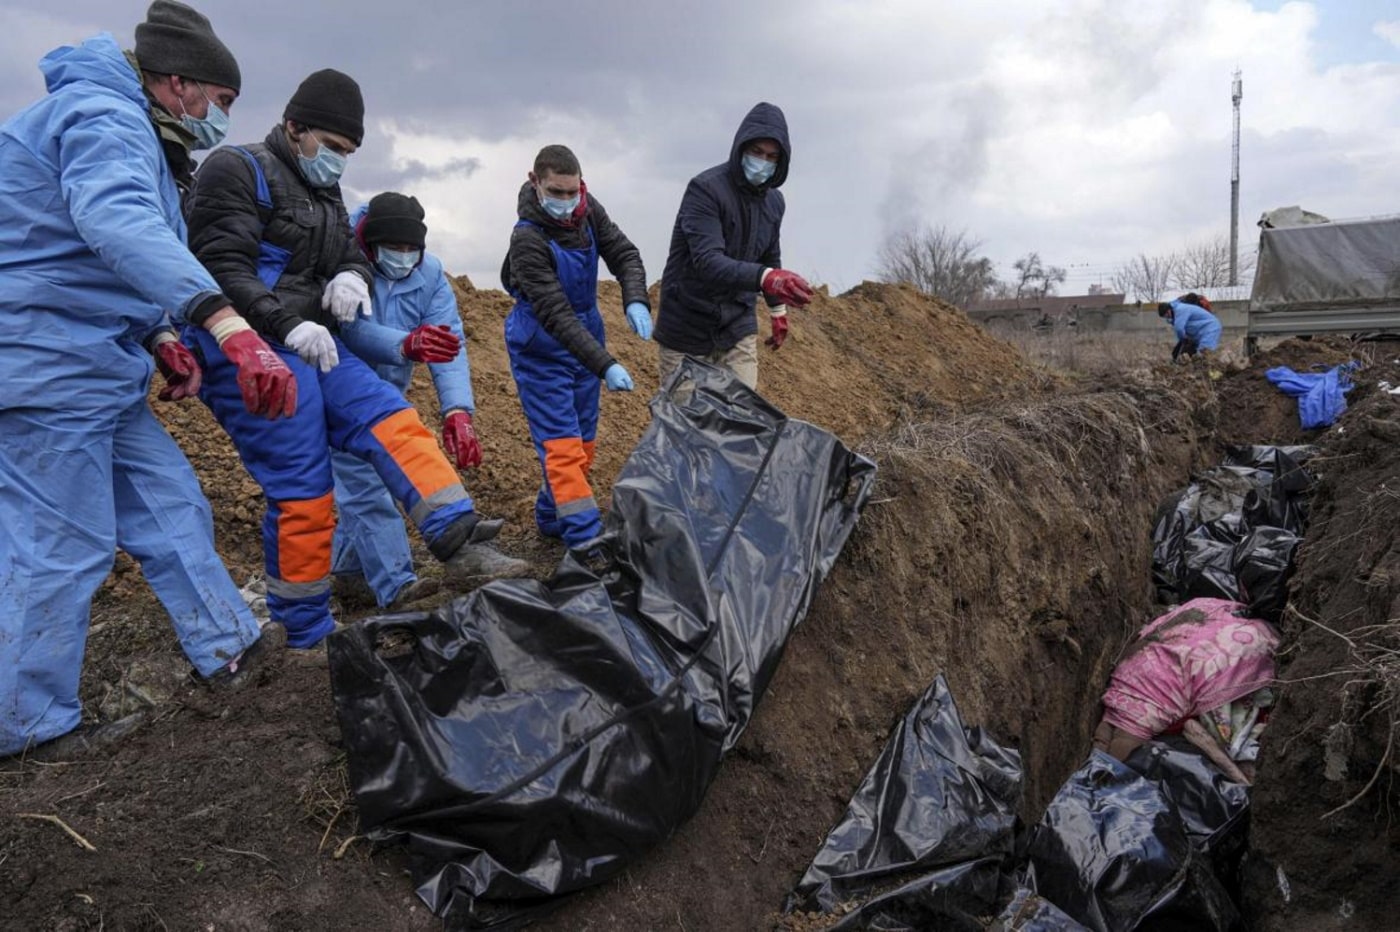 Bodies are placed into a mass grave on the outskirts of Mariupol. The heavy shelling by Russian forces is preventing people from burying their dead EVGENIY MALOLETKA - AP